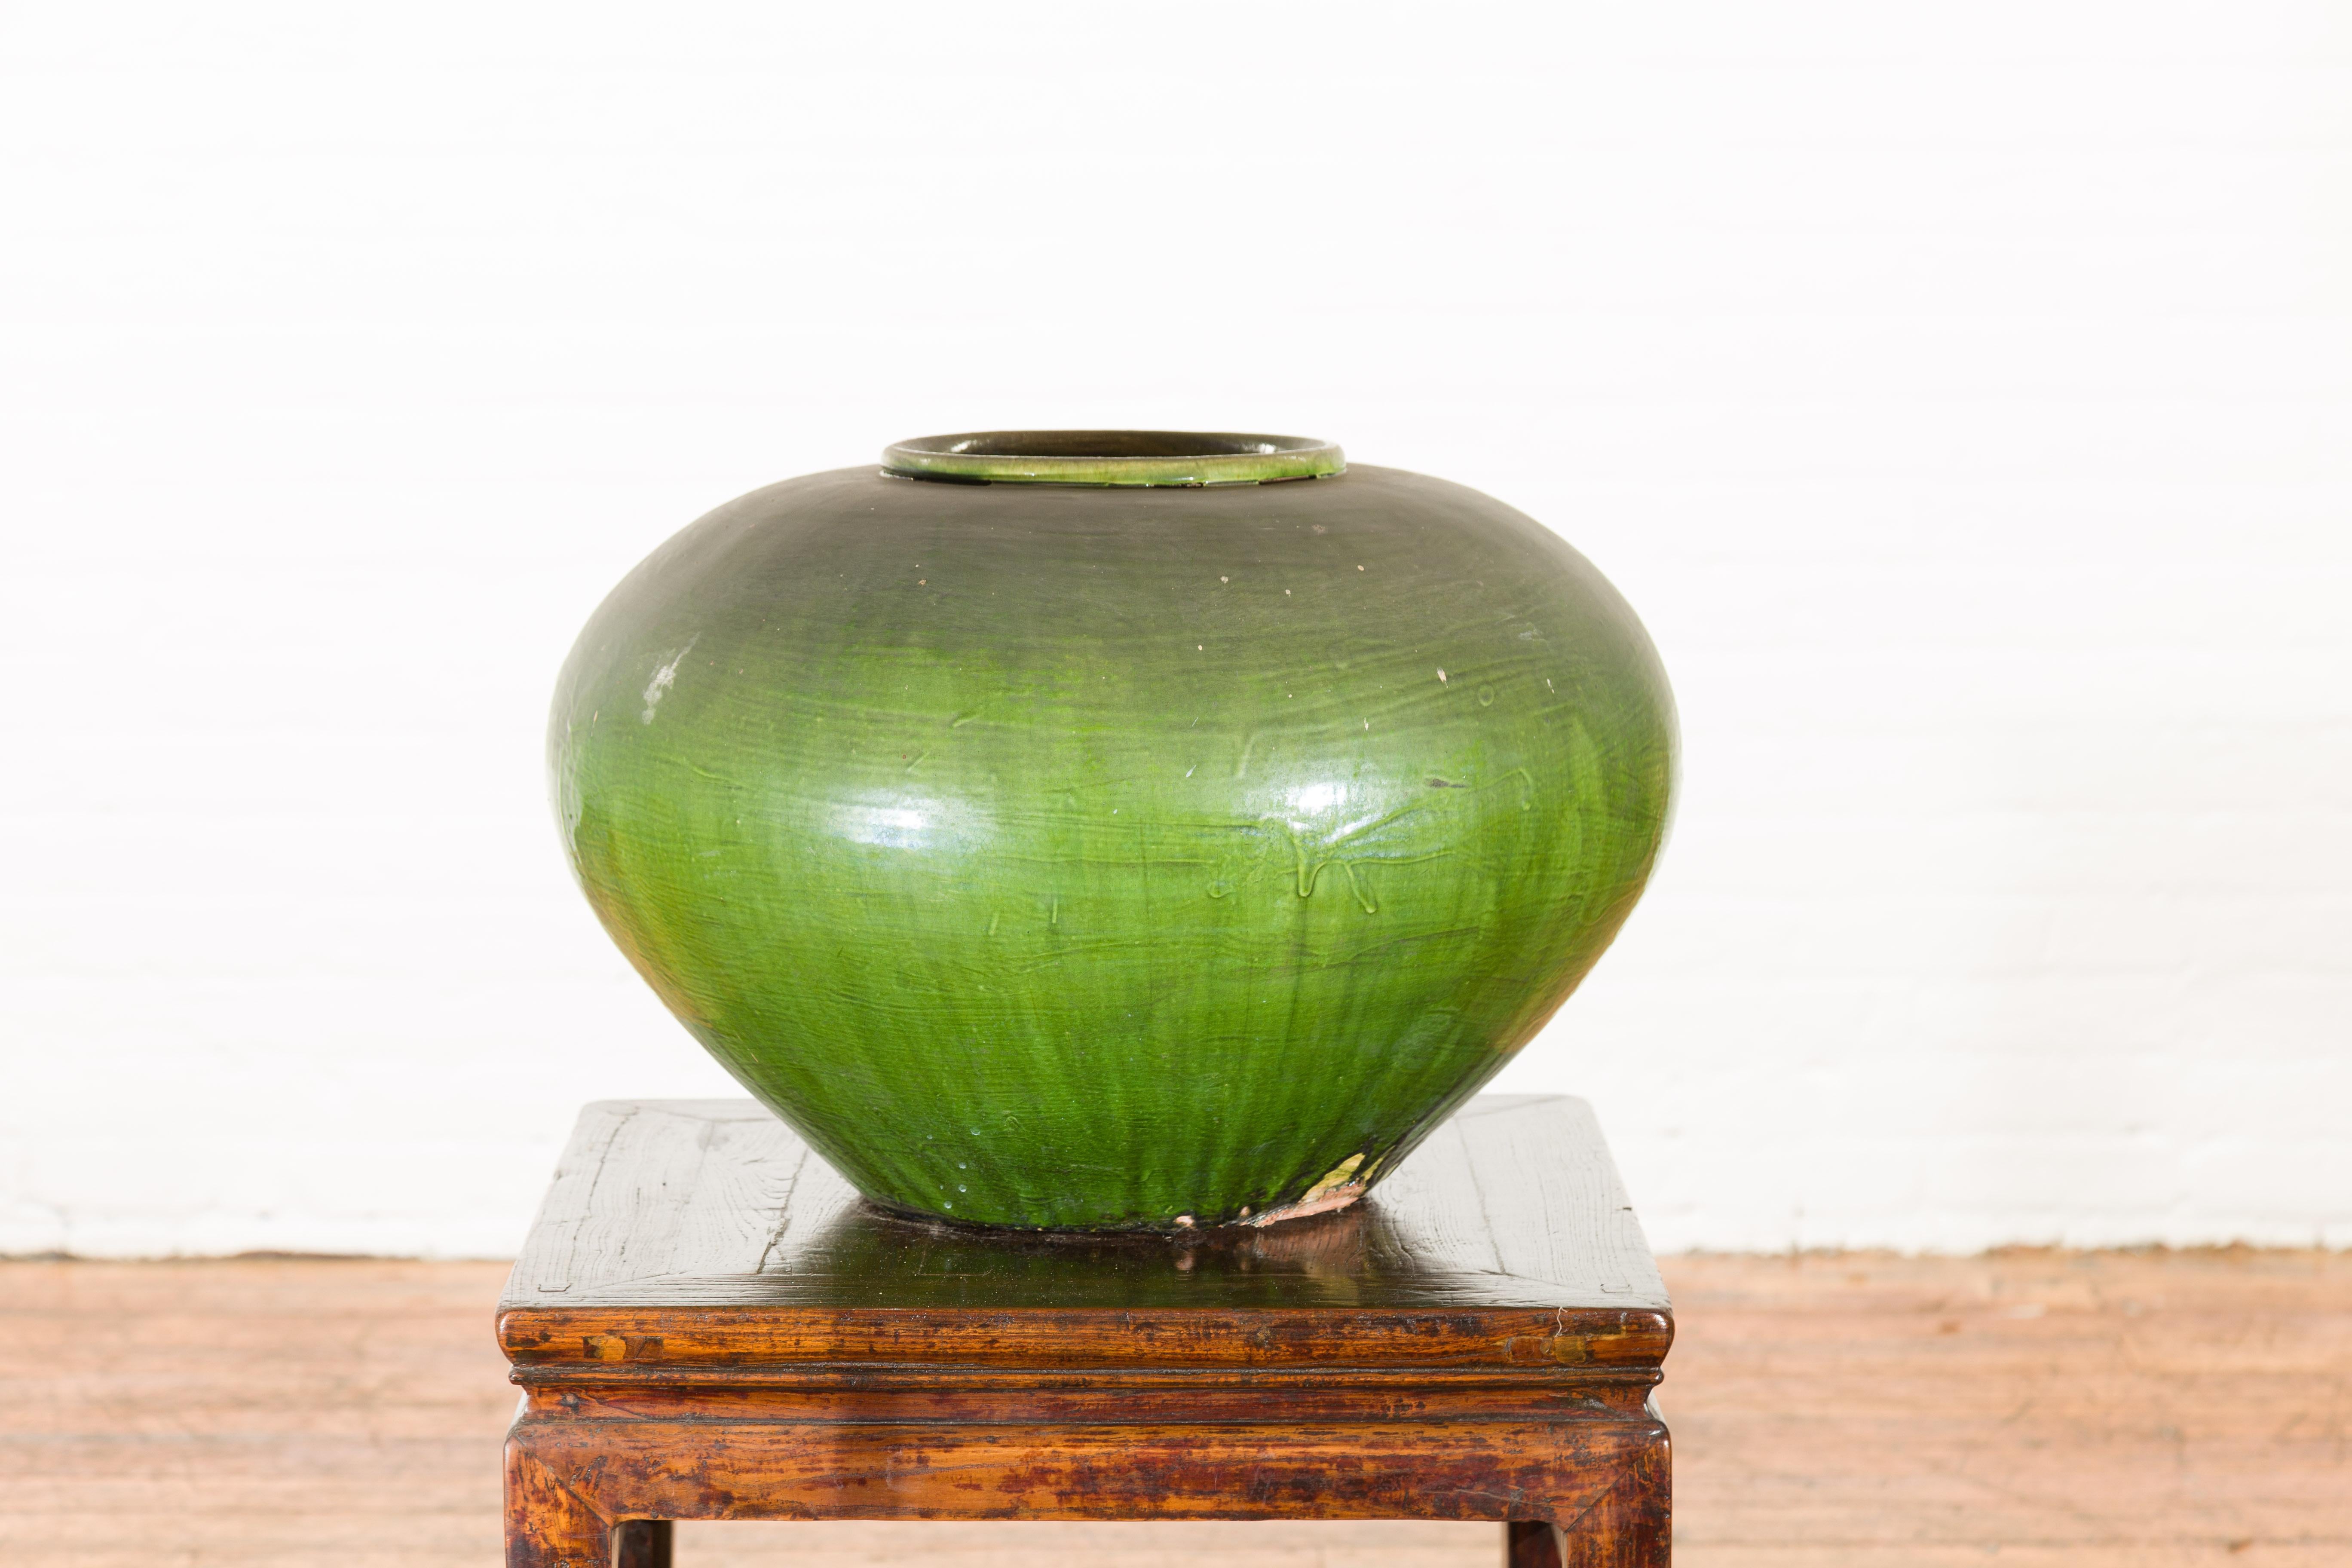 Chinese Vintage Porcelain Low Squat Planter with Verde Glaze and Aged Patina In Good Condition For Sale In Yonkers, NY